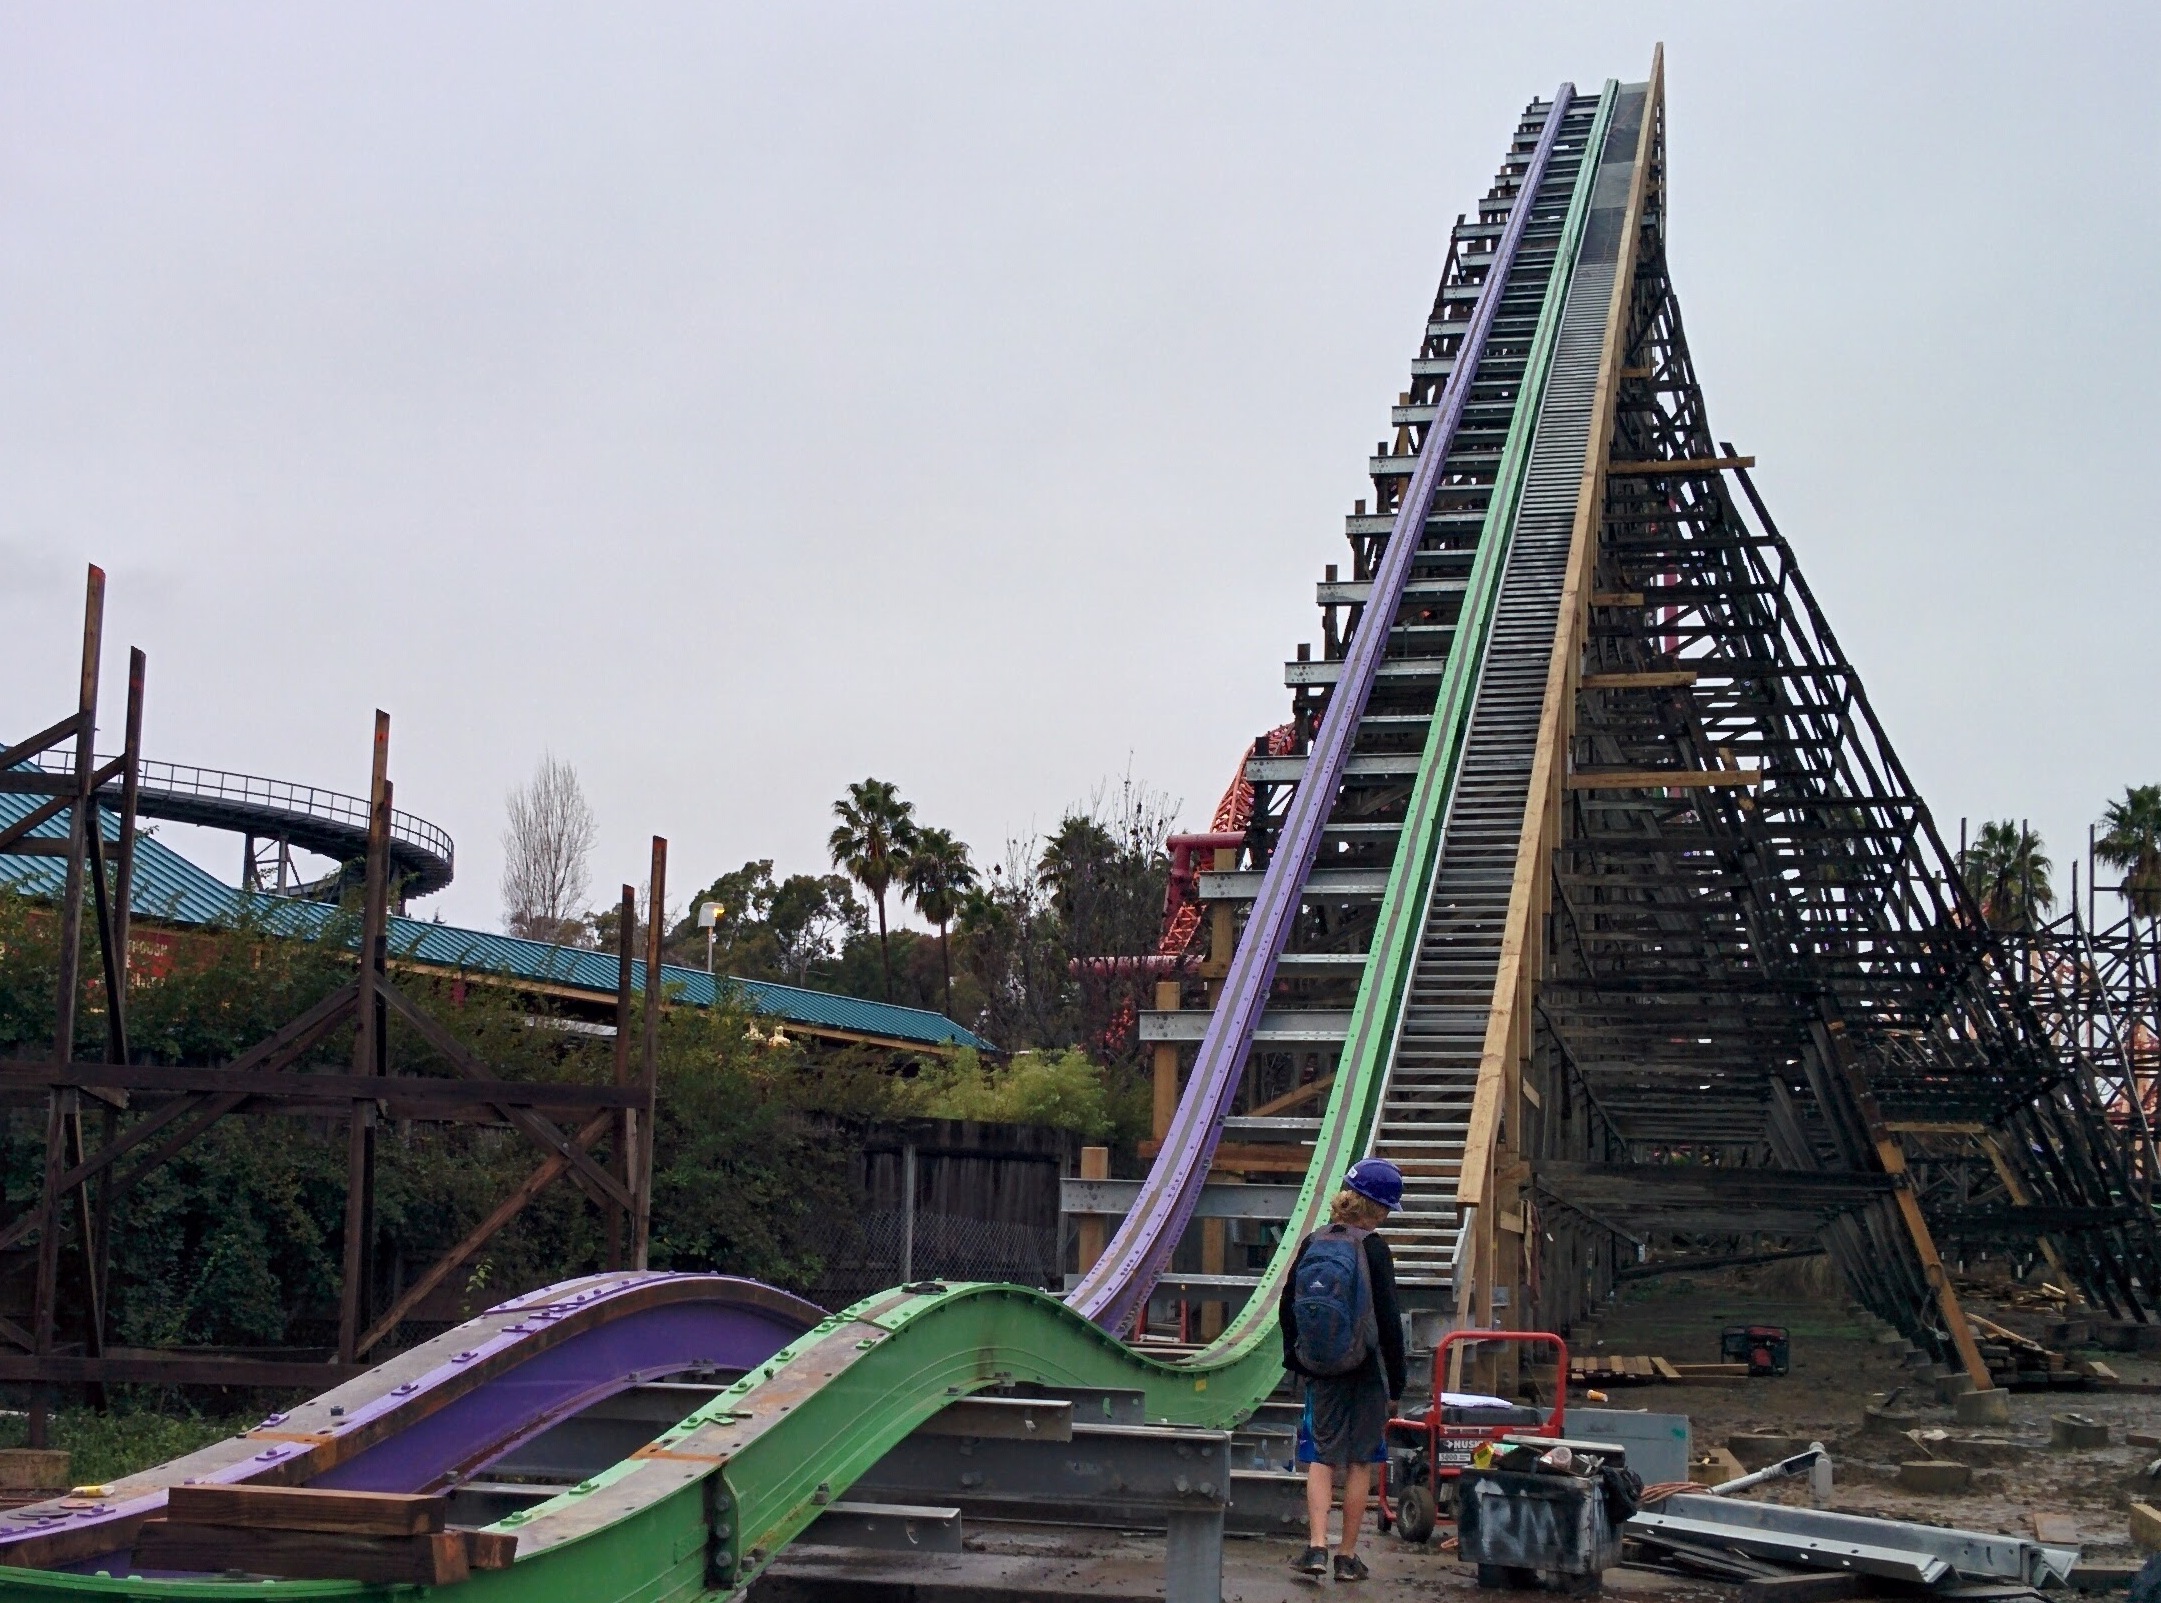 Finally up to the hill, likely the only part of the track with no bumps or twists (and I guess the final brake run).